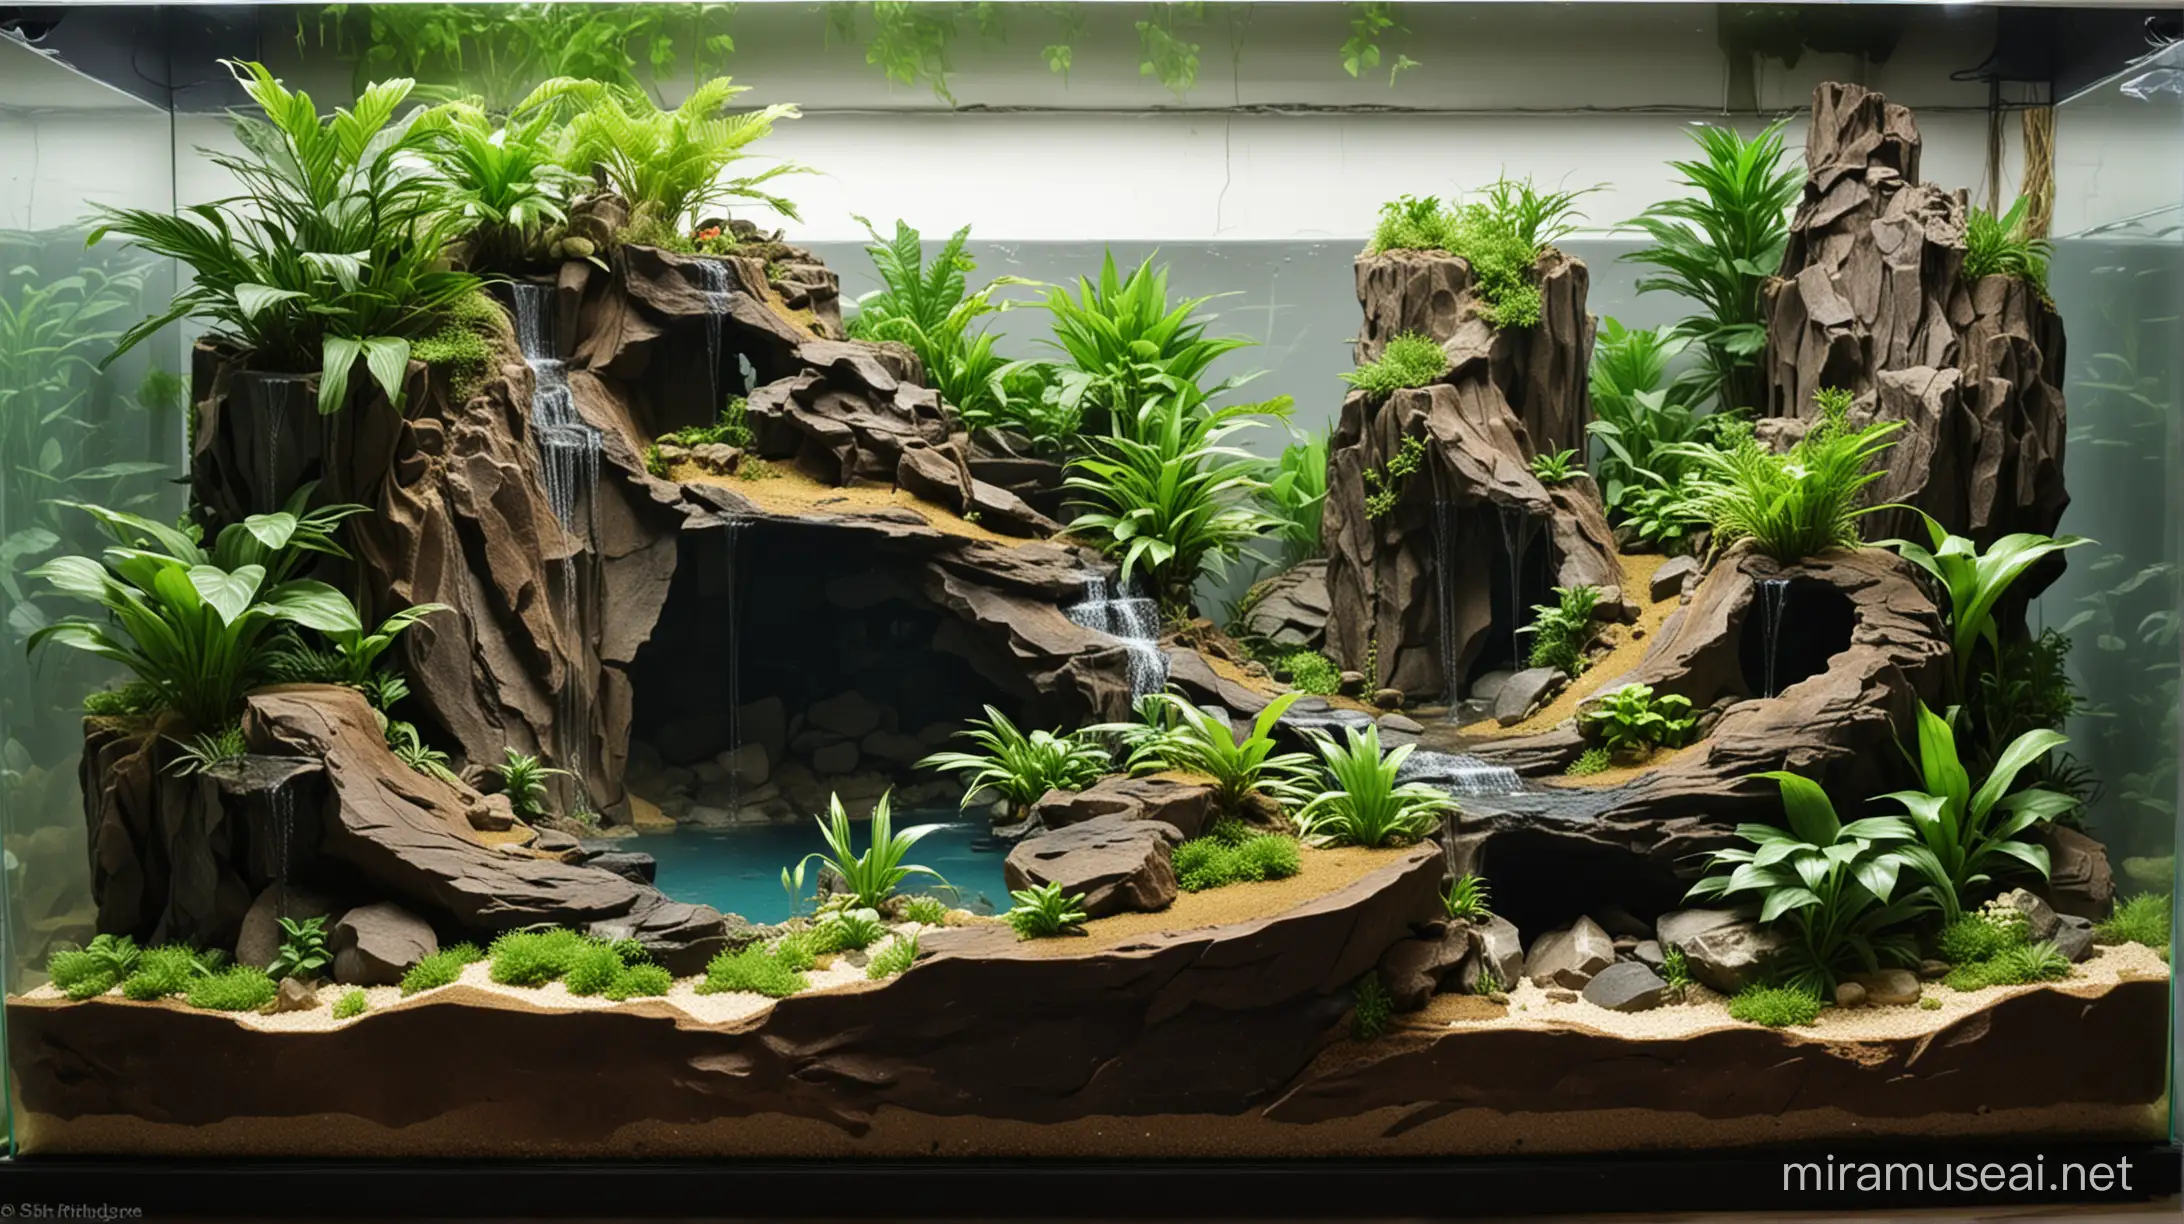 A snake tropical 130cm x 45cm x 45 cm paludarium with an lakeside and with a high cliff waterfall with flat land area and two caves.